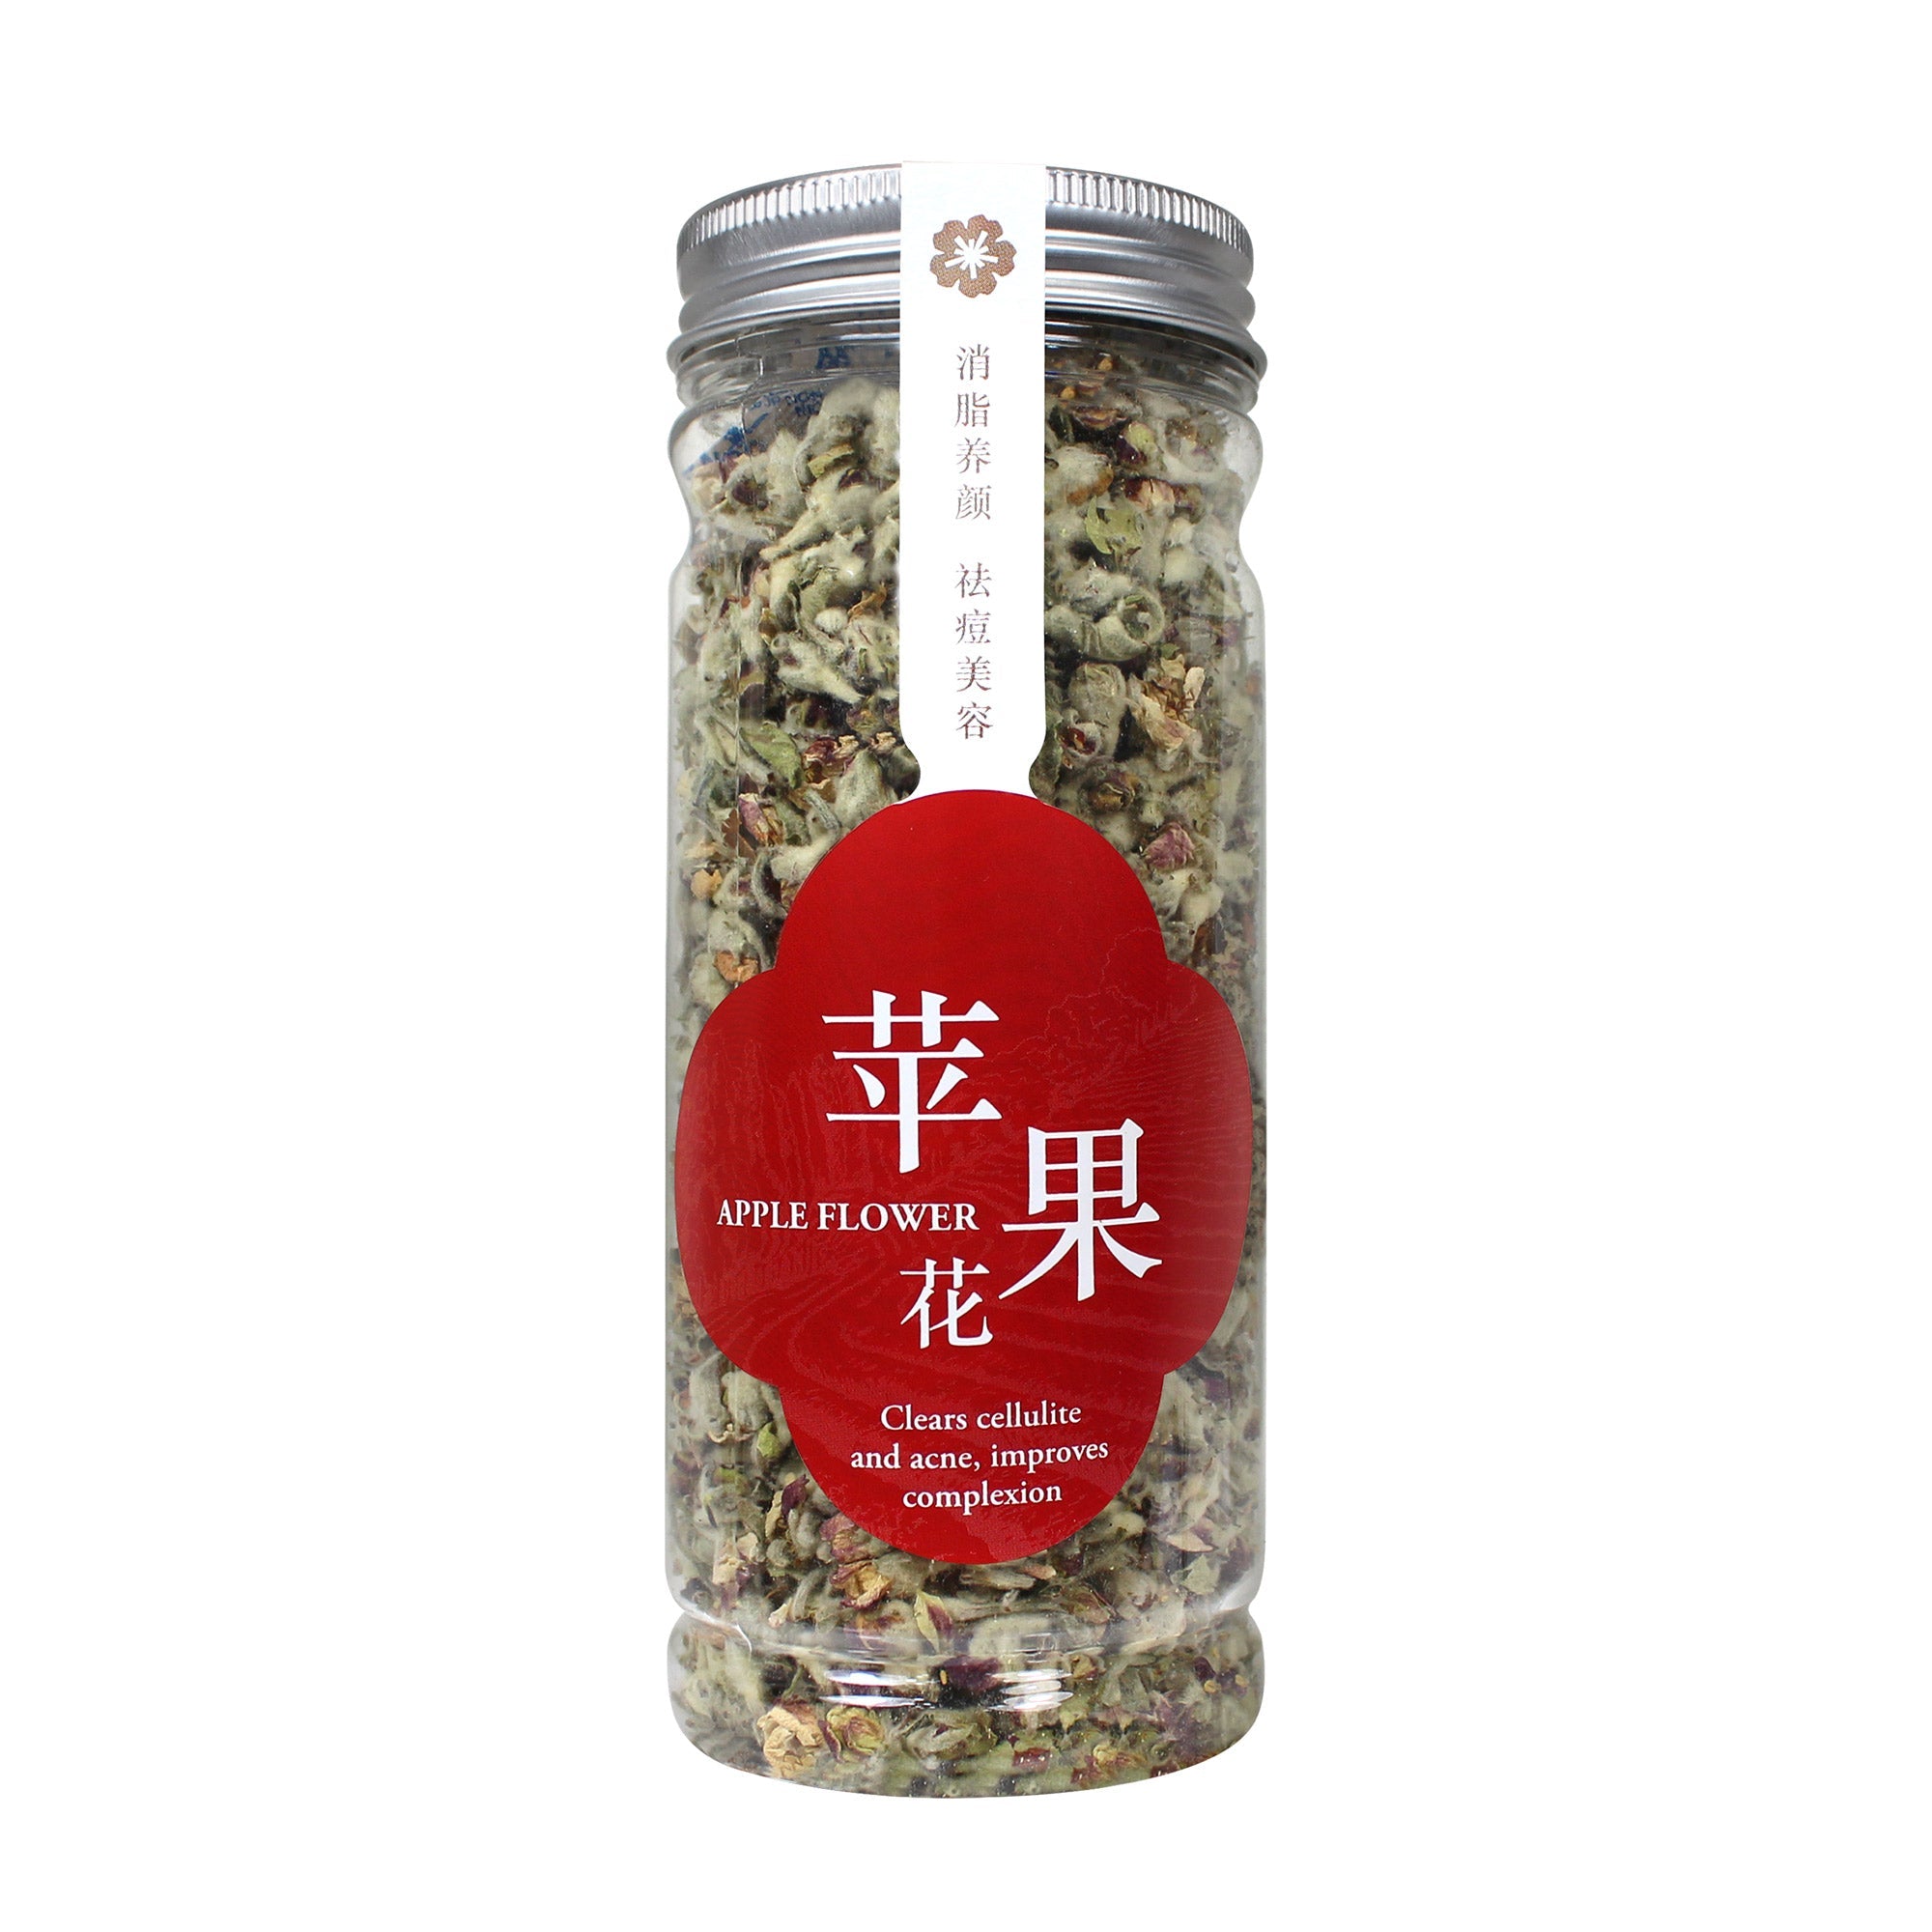 Wing Joo Loong Dried Apple Flower 40g 苹果花